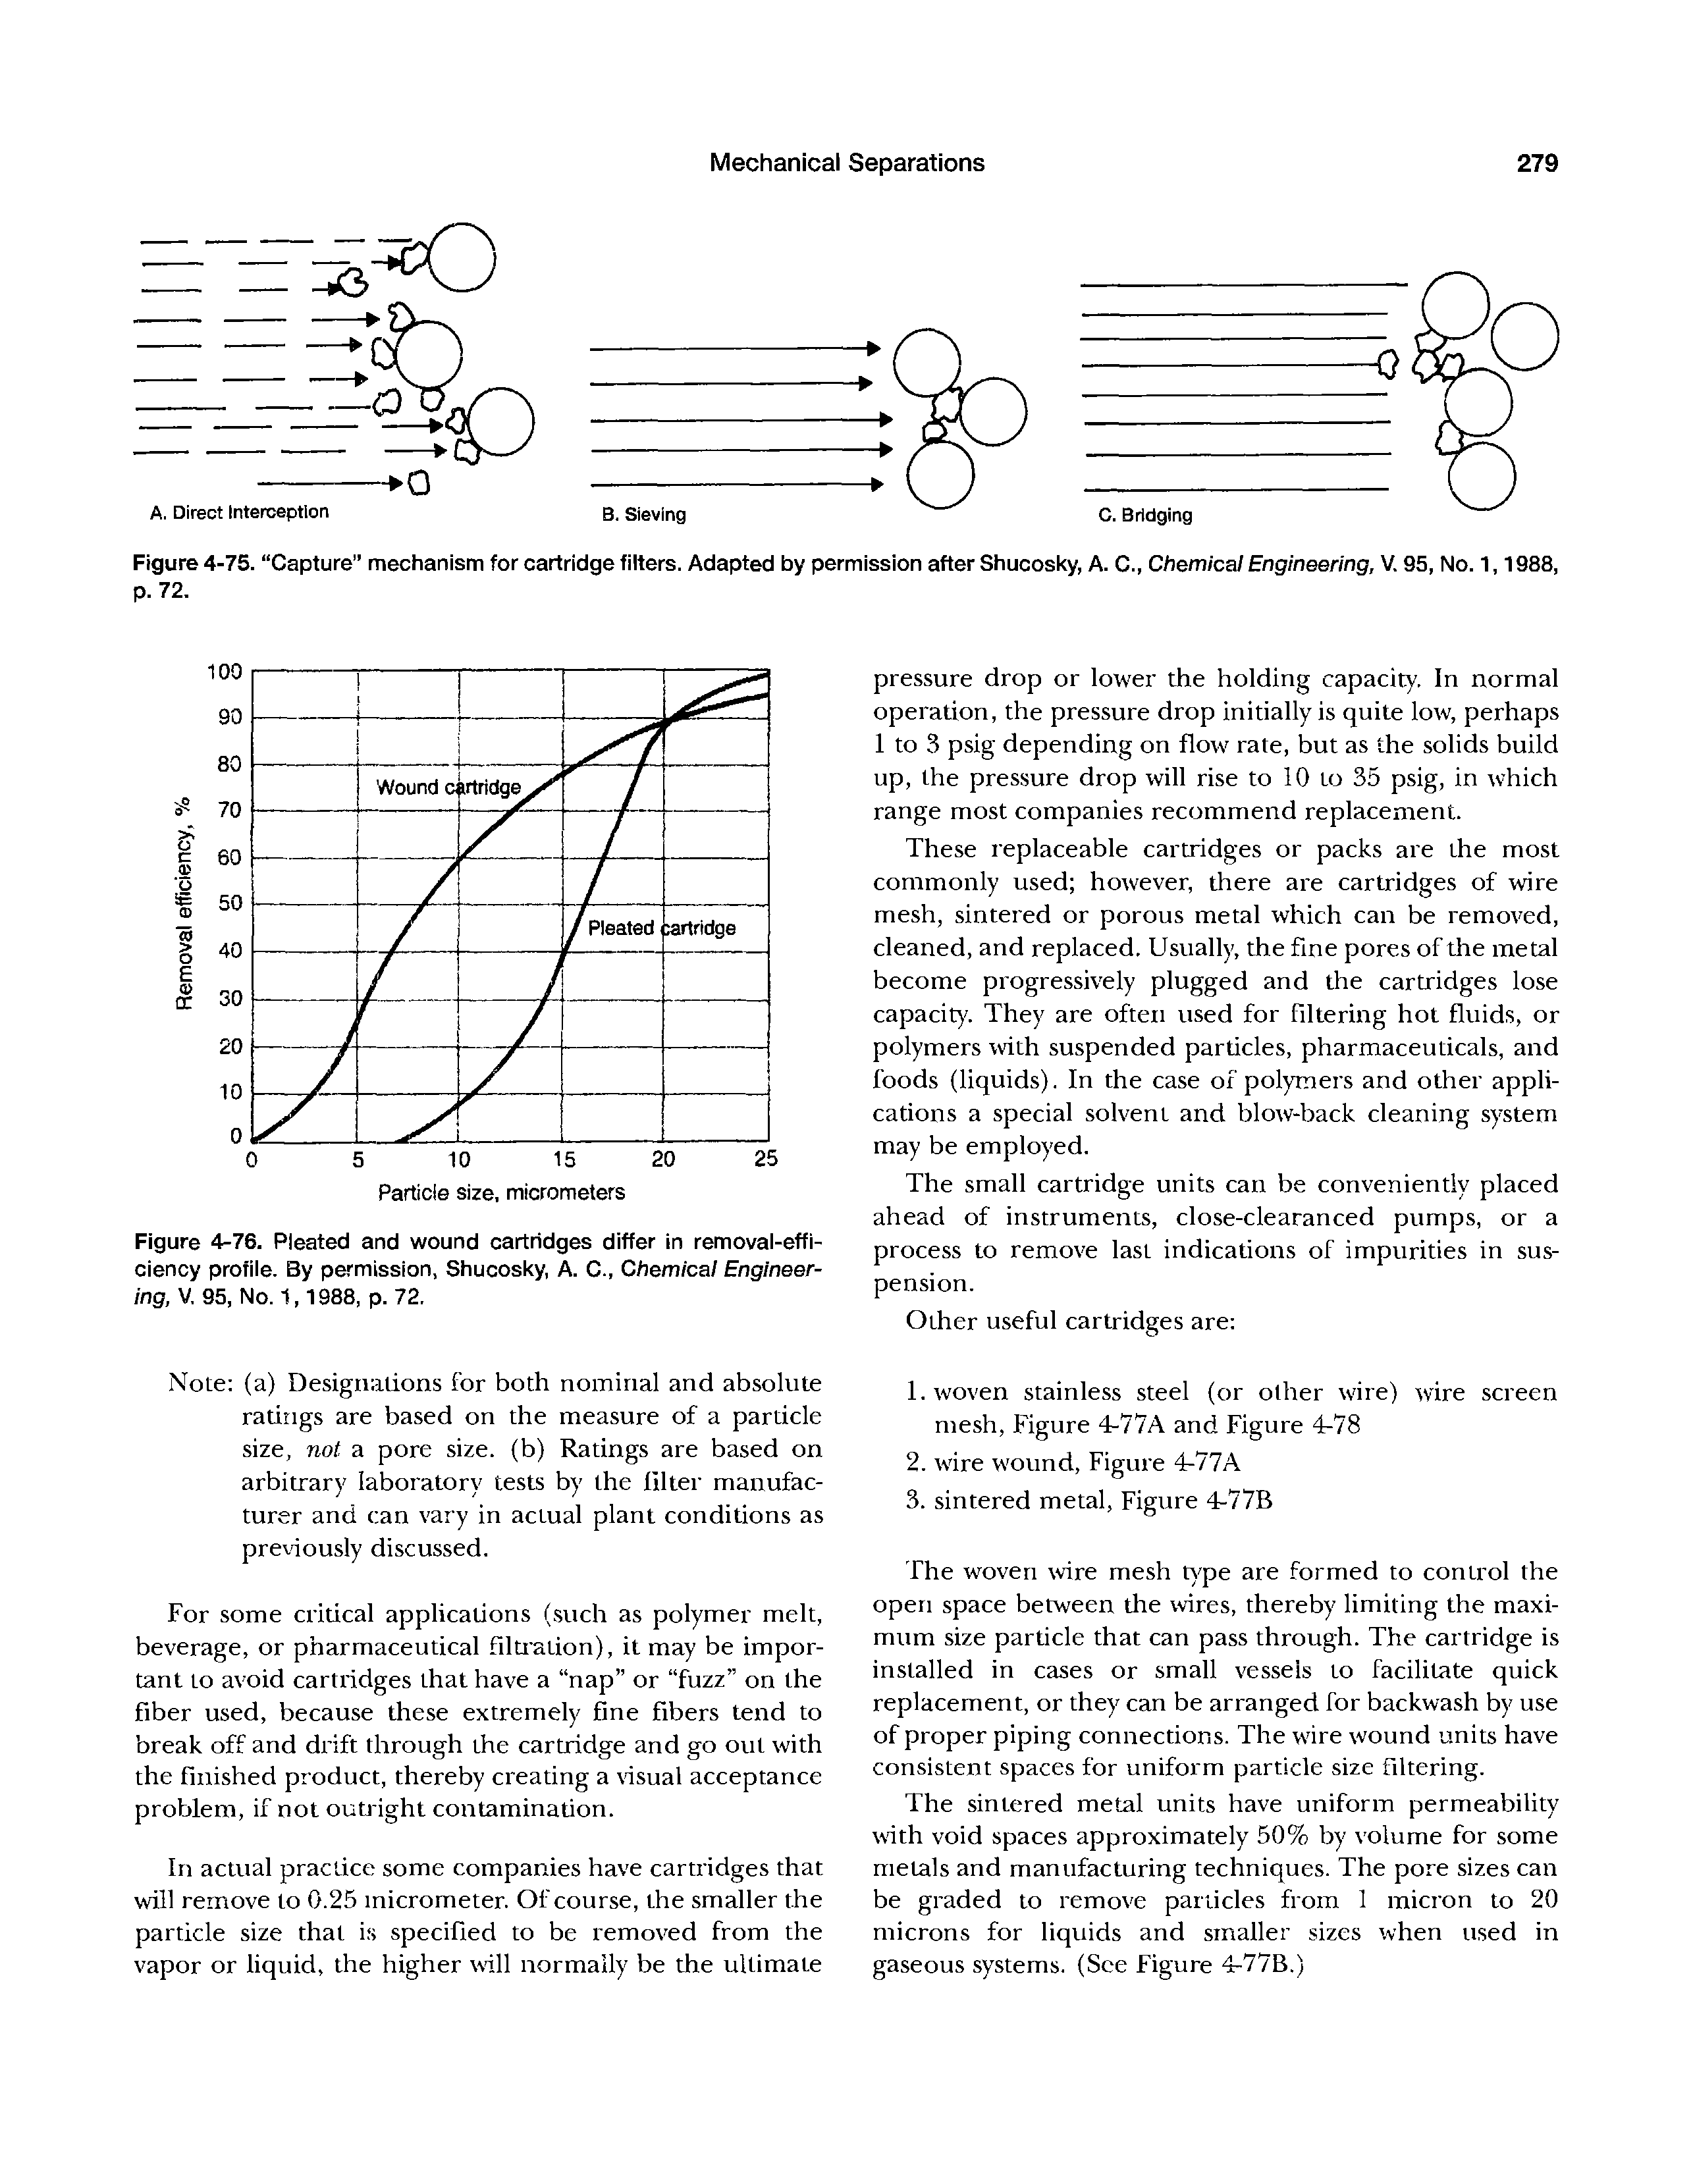 Figure 4-75. Capture mechanism for cartridge filters. Adapted by permission after Shucosky, A. C., Chemical Engineering, V. 95, No. 1,1988, p. 72.